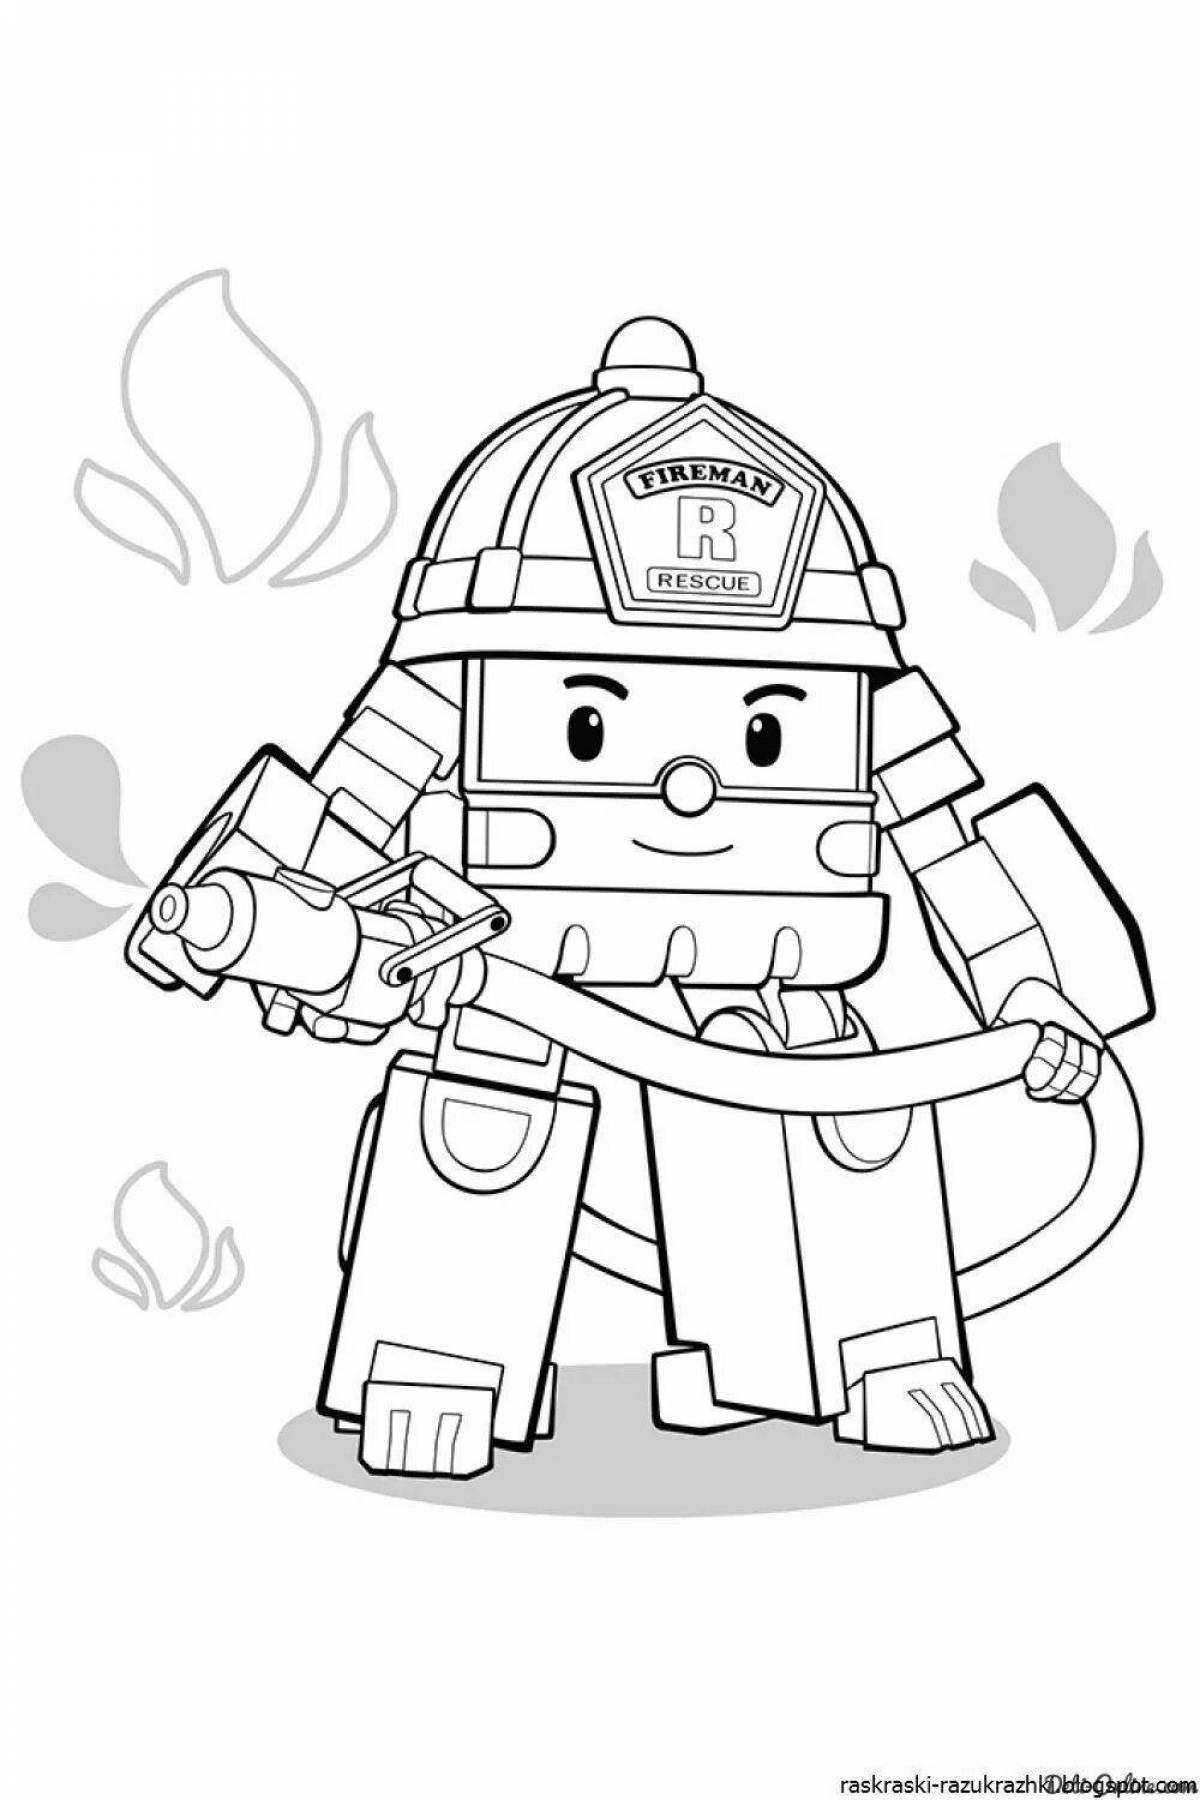 Poly robocar bold firetruck coloring page